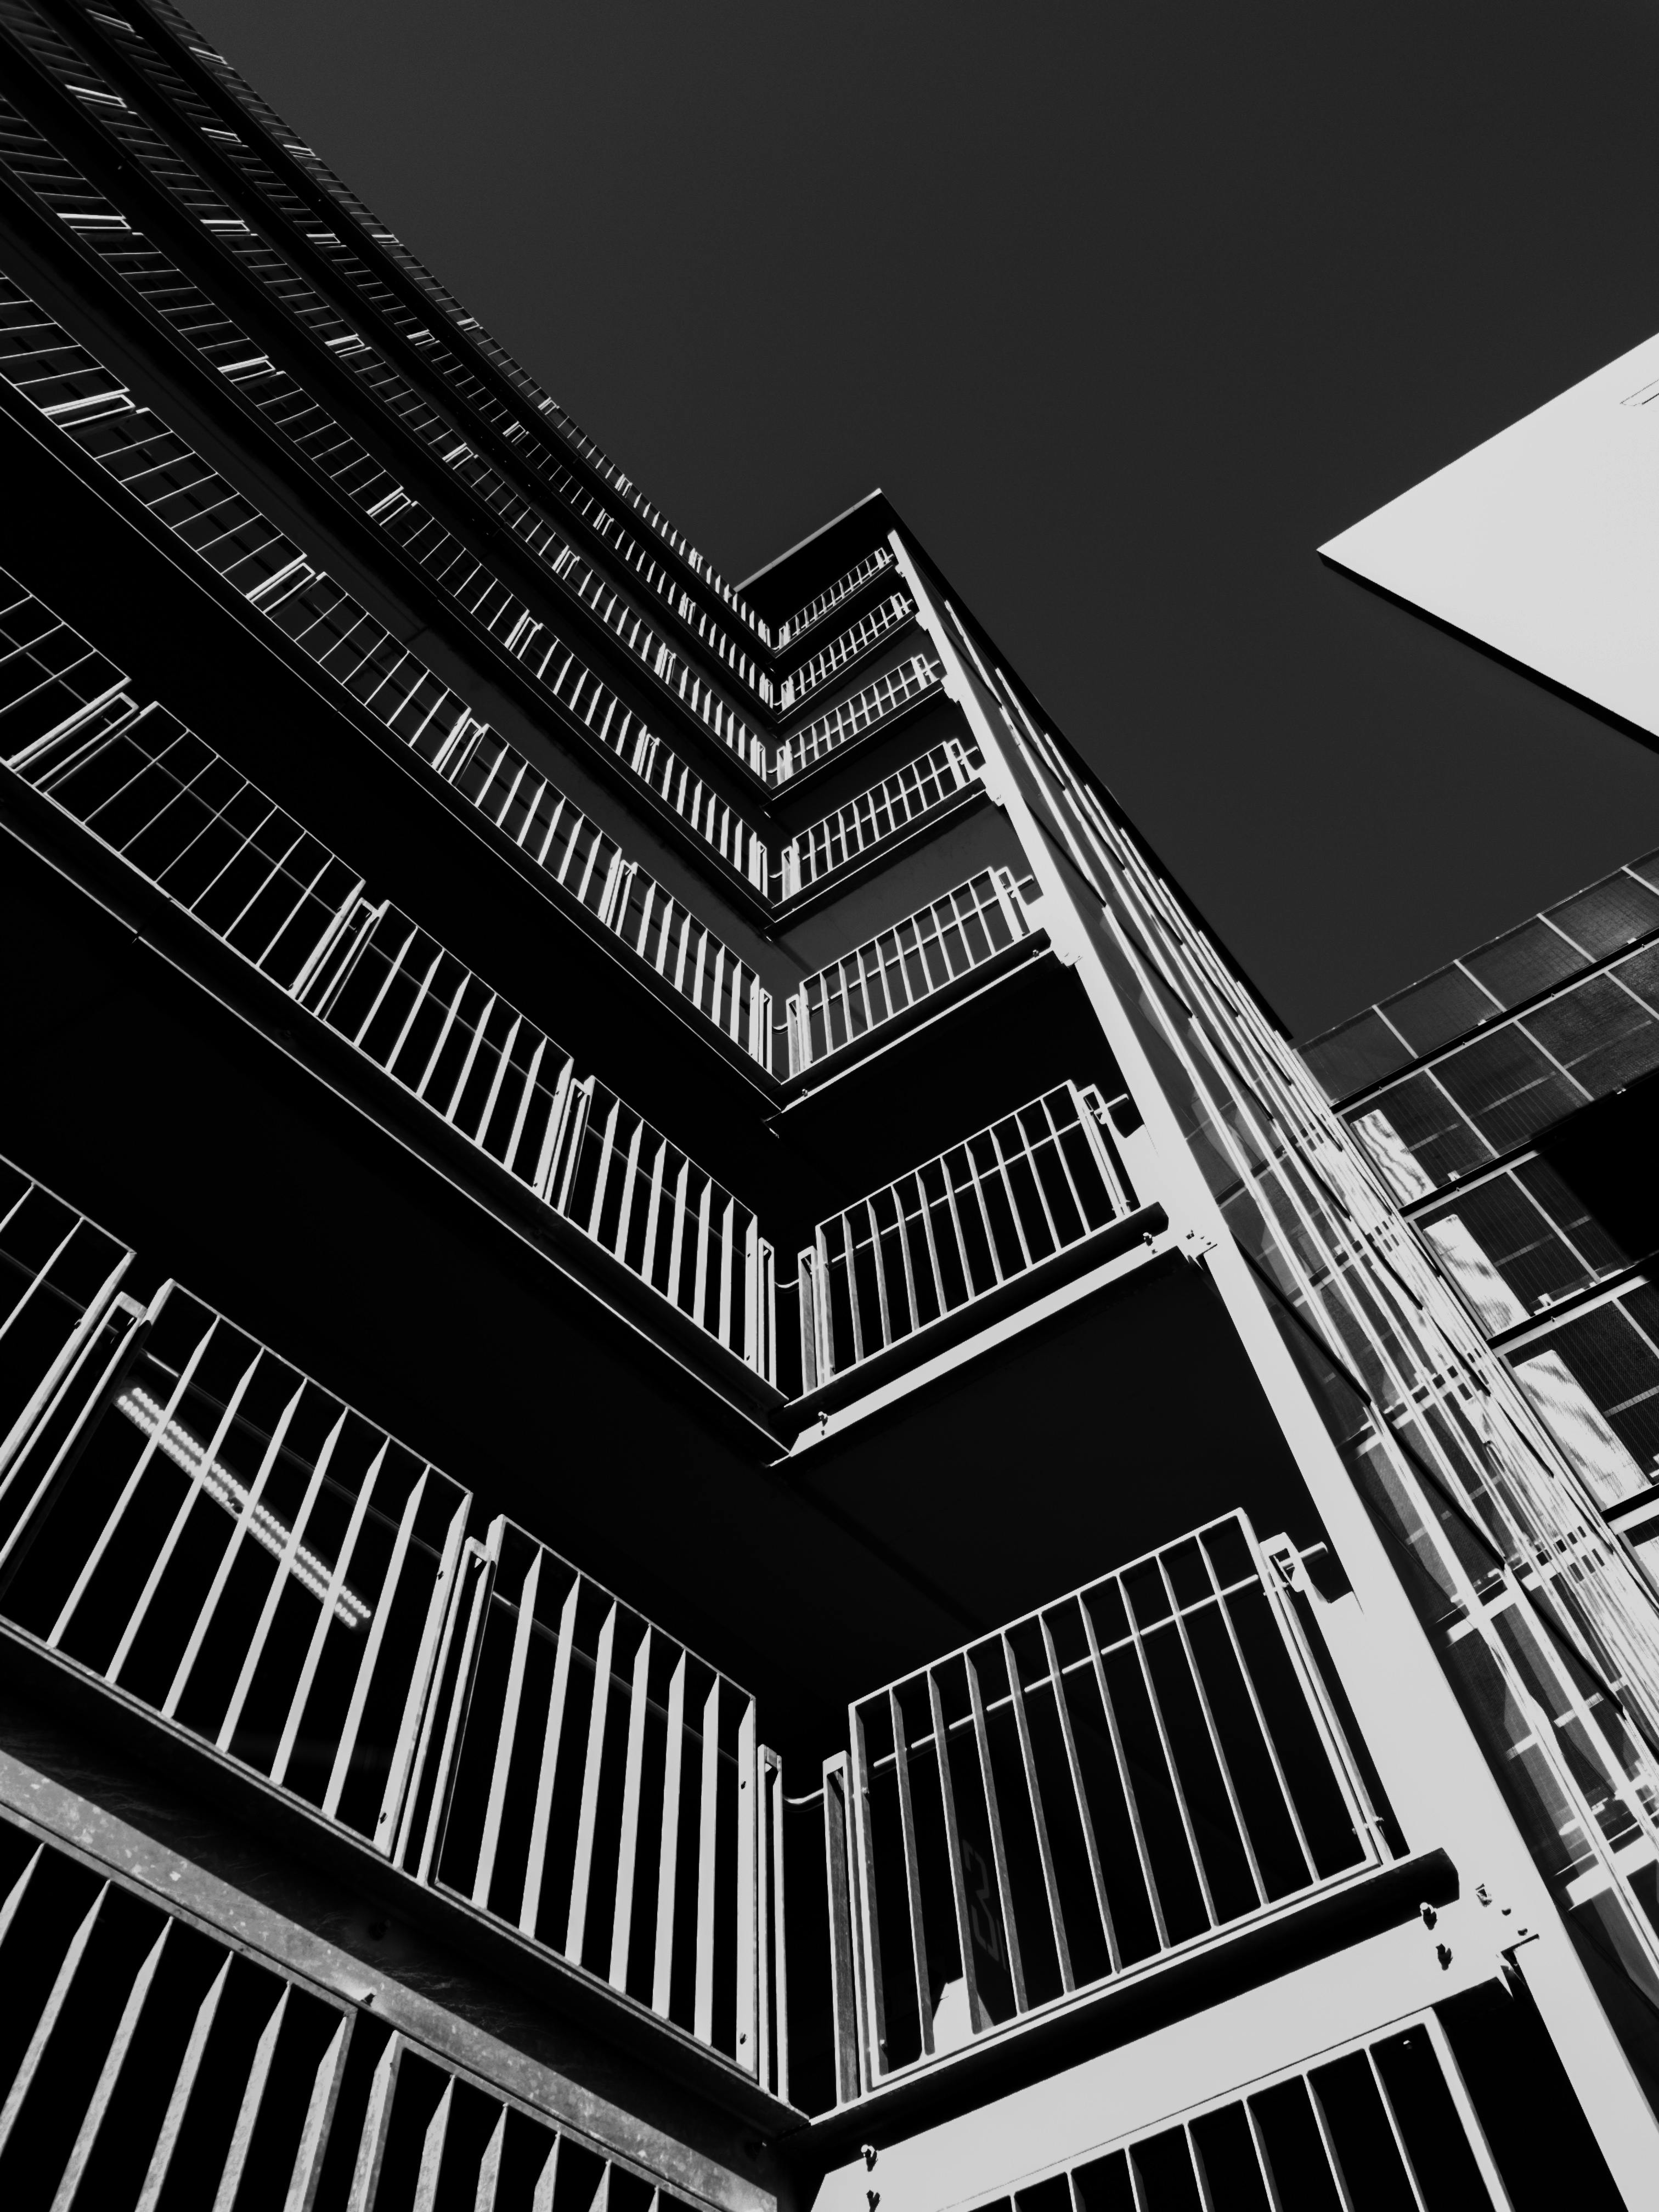 Architectural Photography of White and Black Building · Free Stock Photo